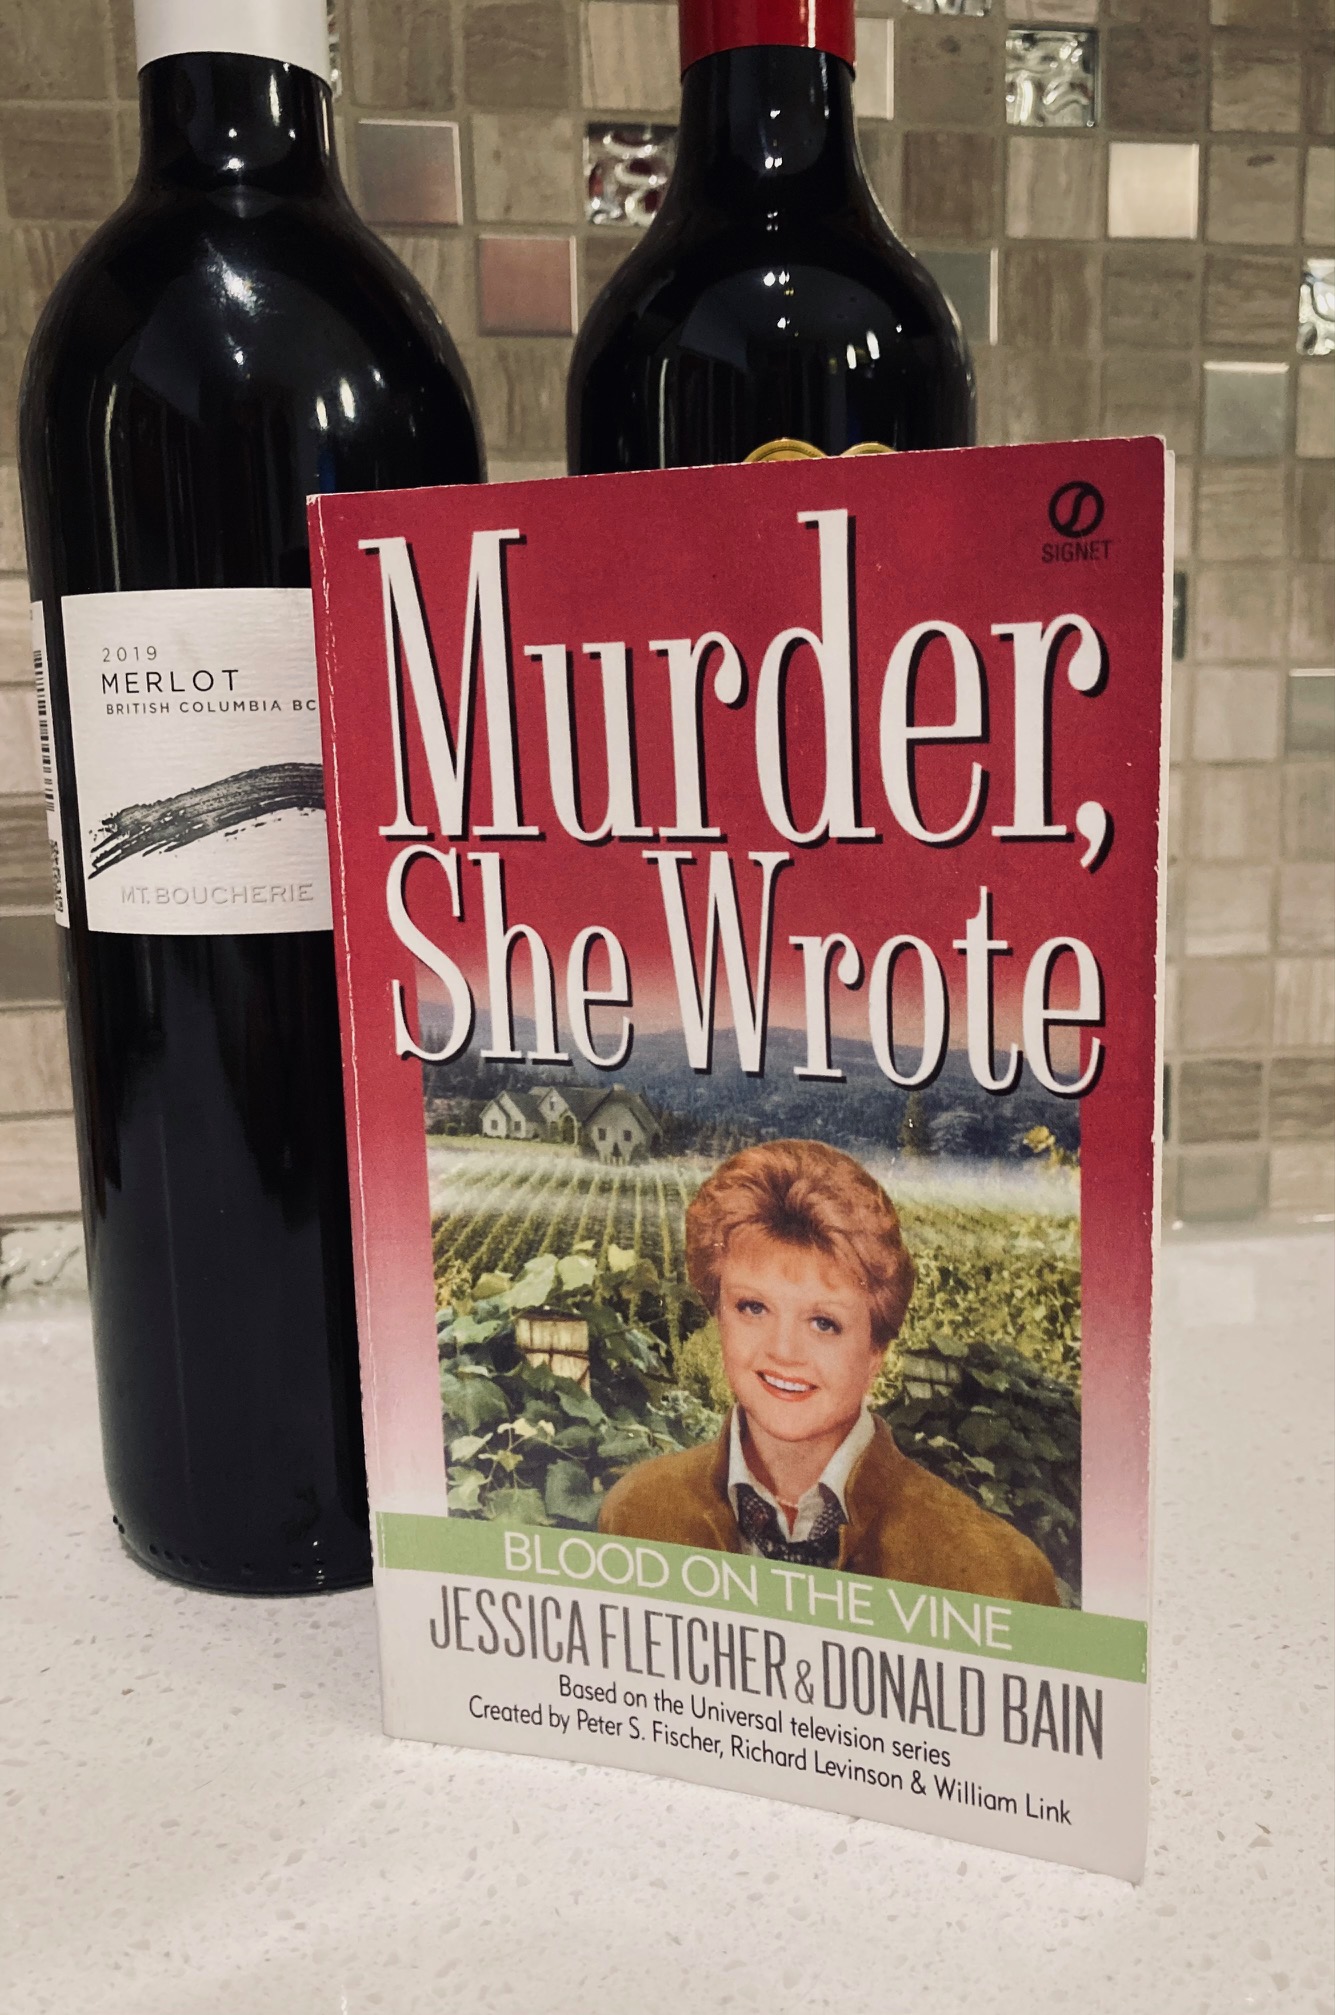 Murder She Wrote: Blood on the Vine by Jessica Fletcher and Donald Bain book